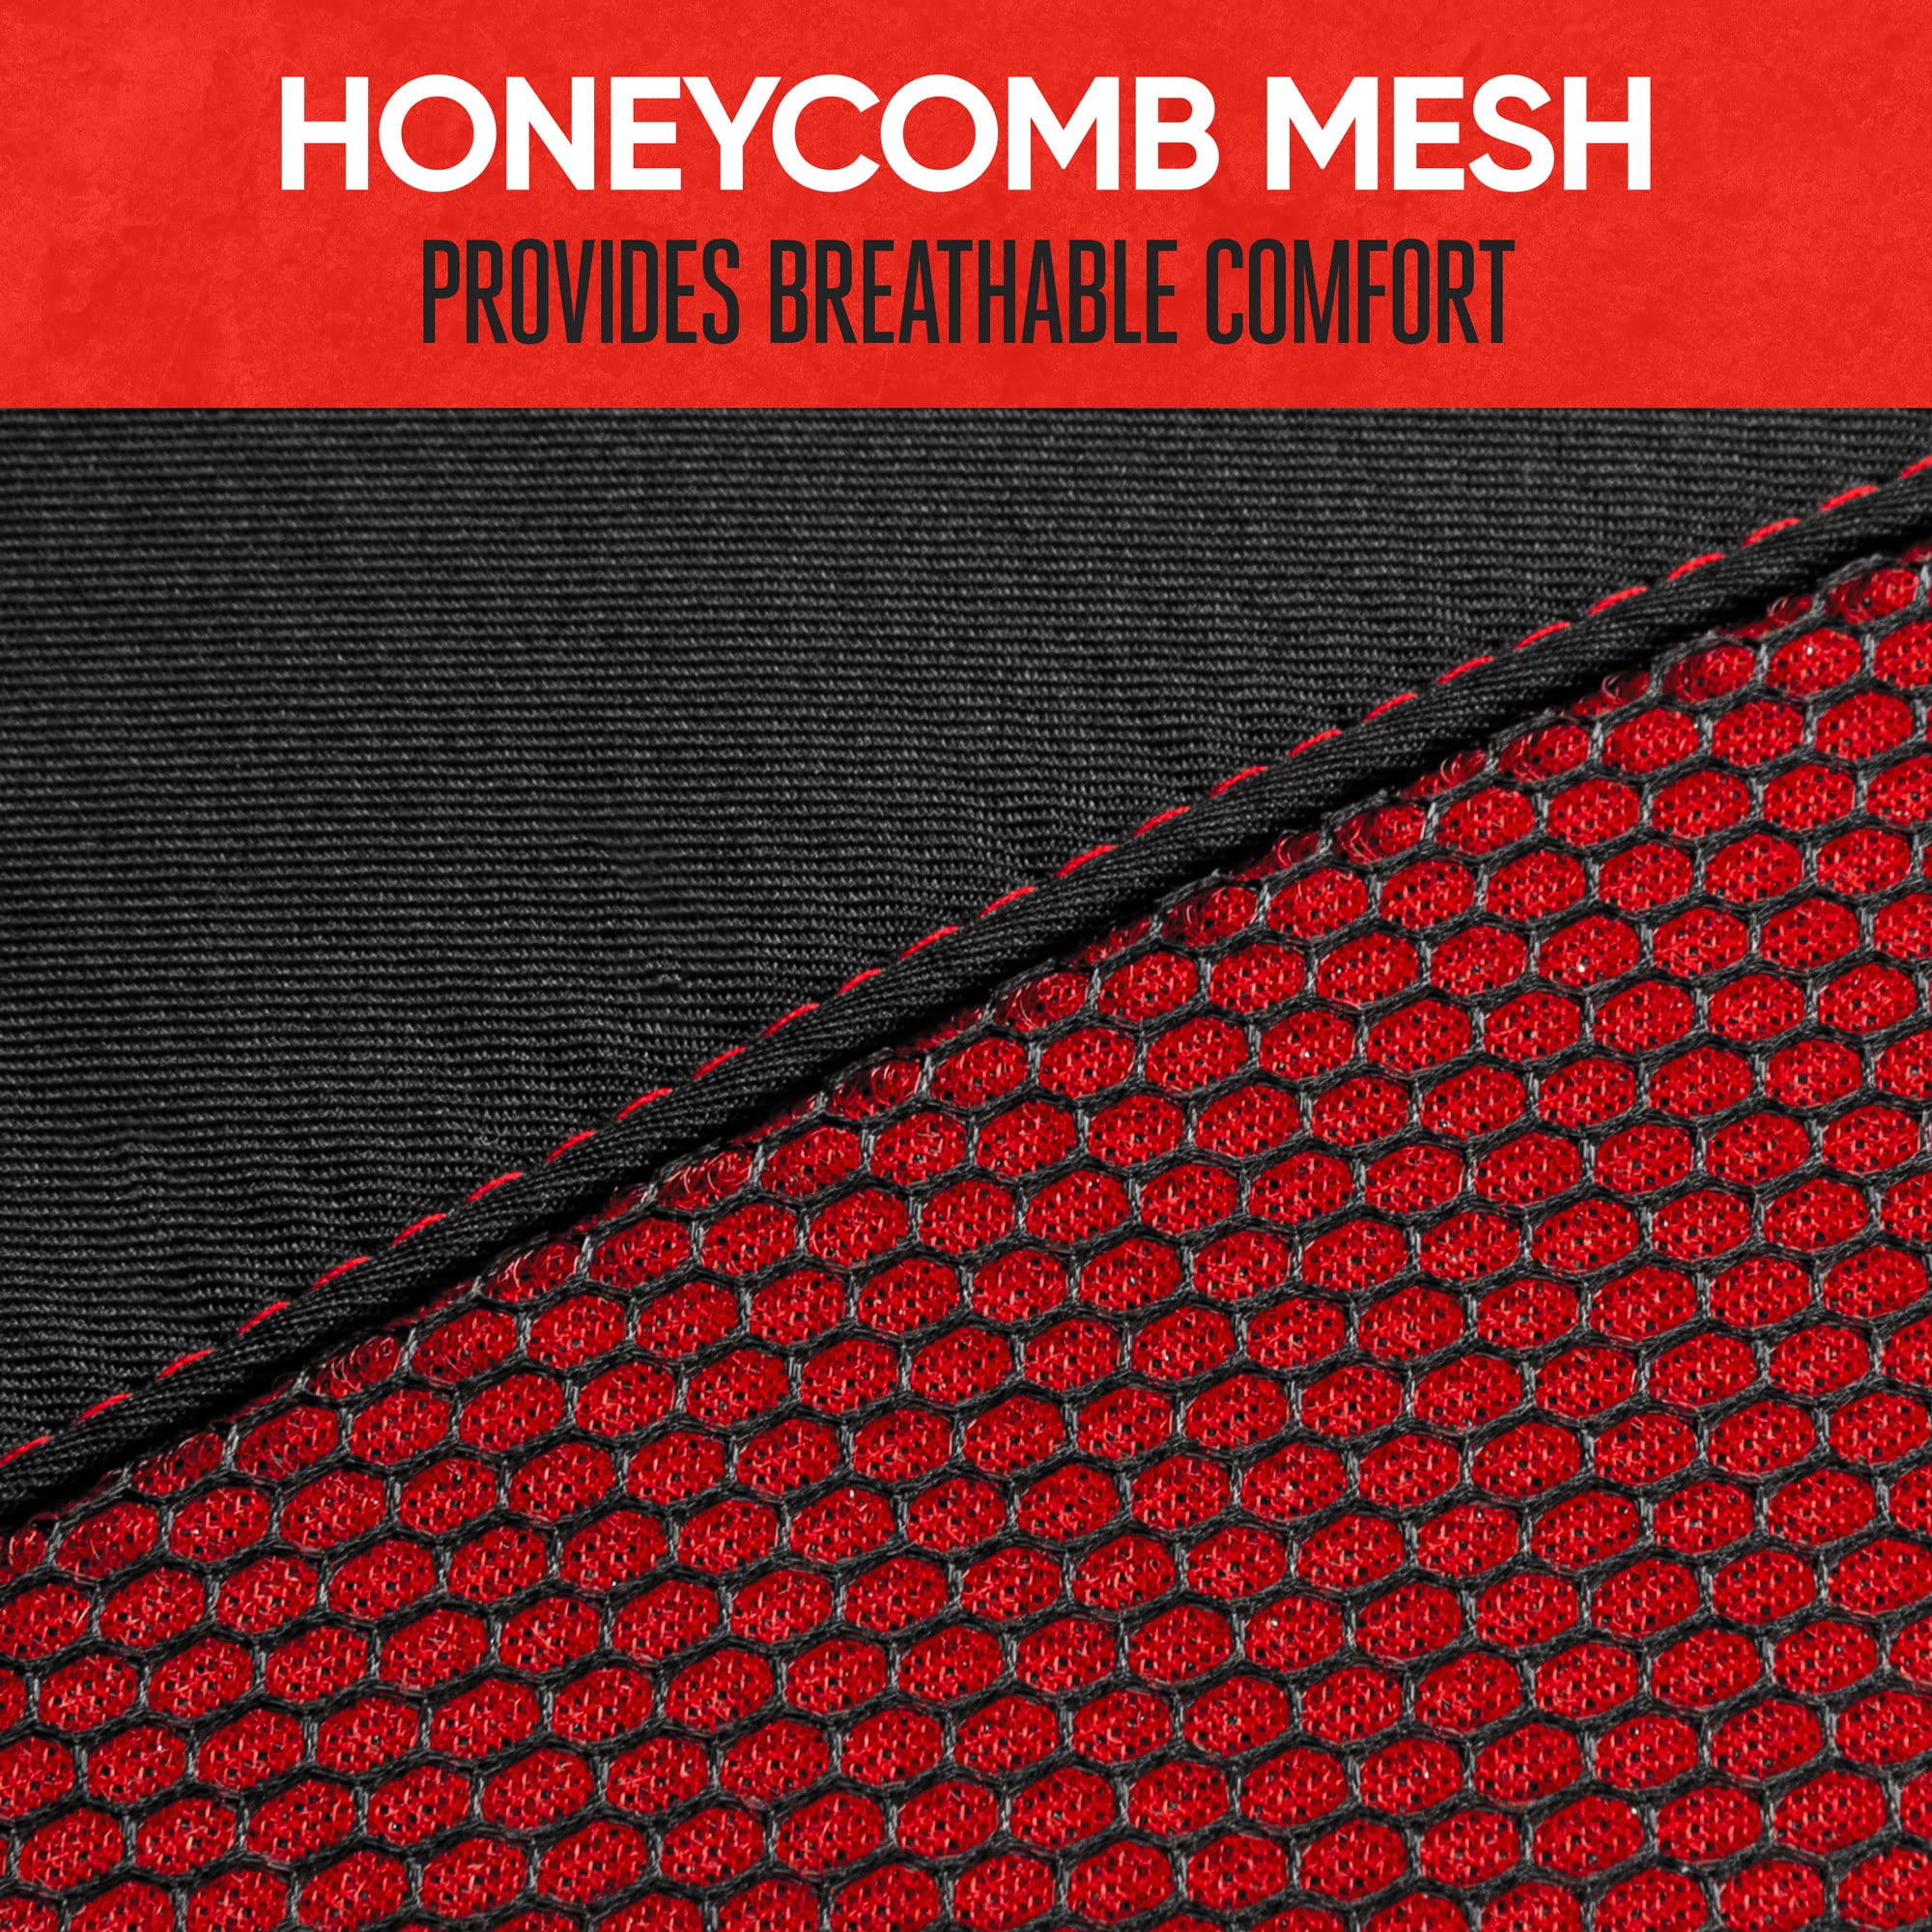 Motor Trend Red Mesh Car Seat Covers for Front Seats – Premium High Back Automotive Seat Covers, Made for Vehicles with Integrated Fixed Headrests, Interior Covers for Car Truck Van and SUV